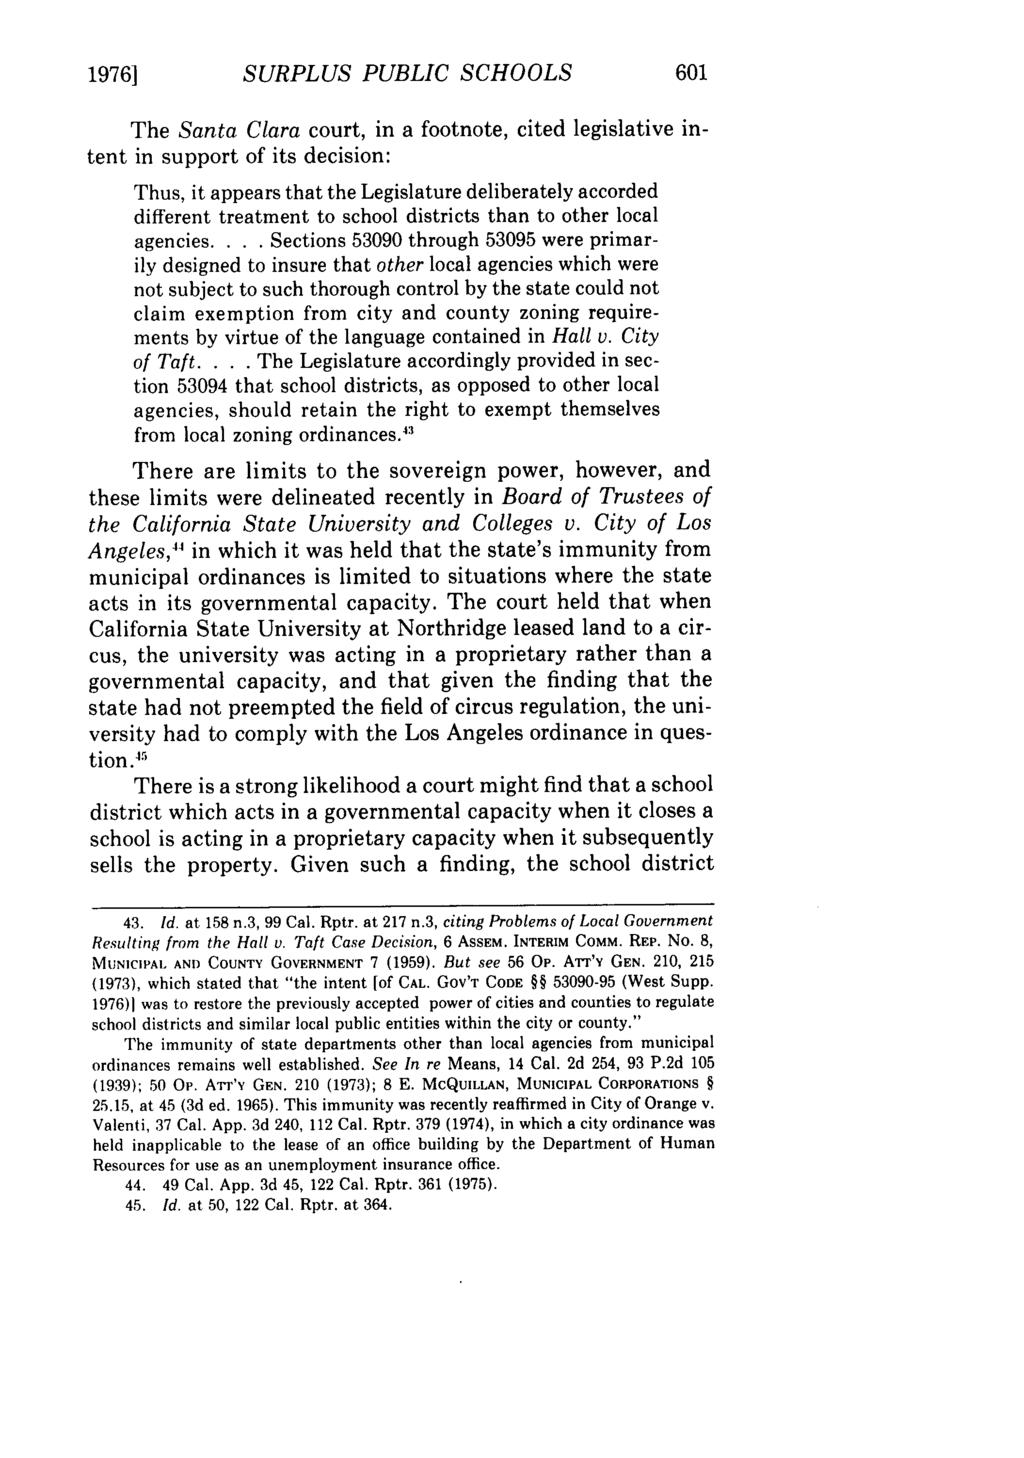 1976] SURPLUS PUBLIC SCHOOLS The Santa Clara court, in a footnote, cited legislative intent in support of its decision: Thus, it appears that the Legislature deliberately accorded different treatment